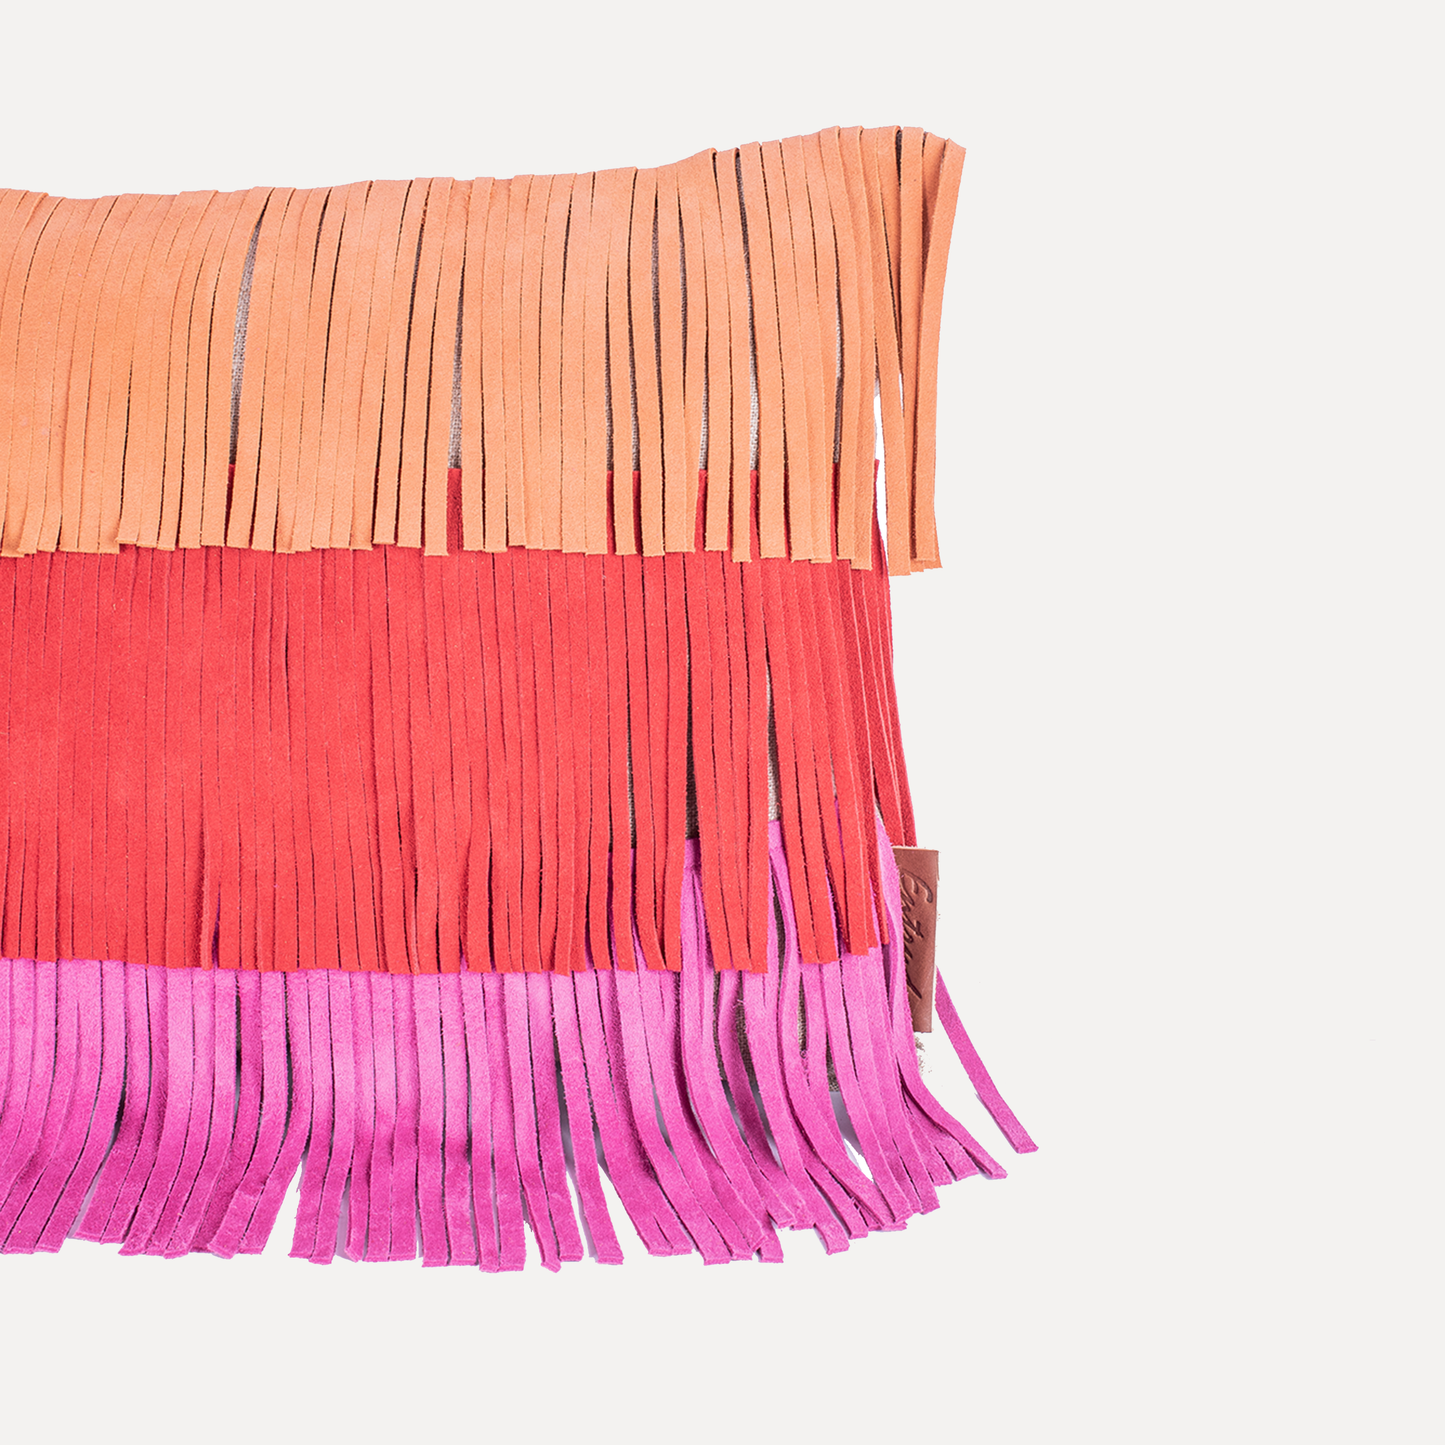 Lazarim - cushion with leather fringes in pink